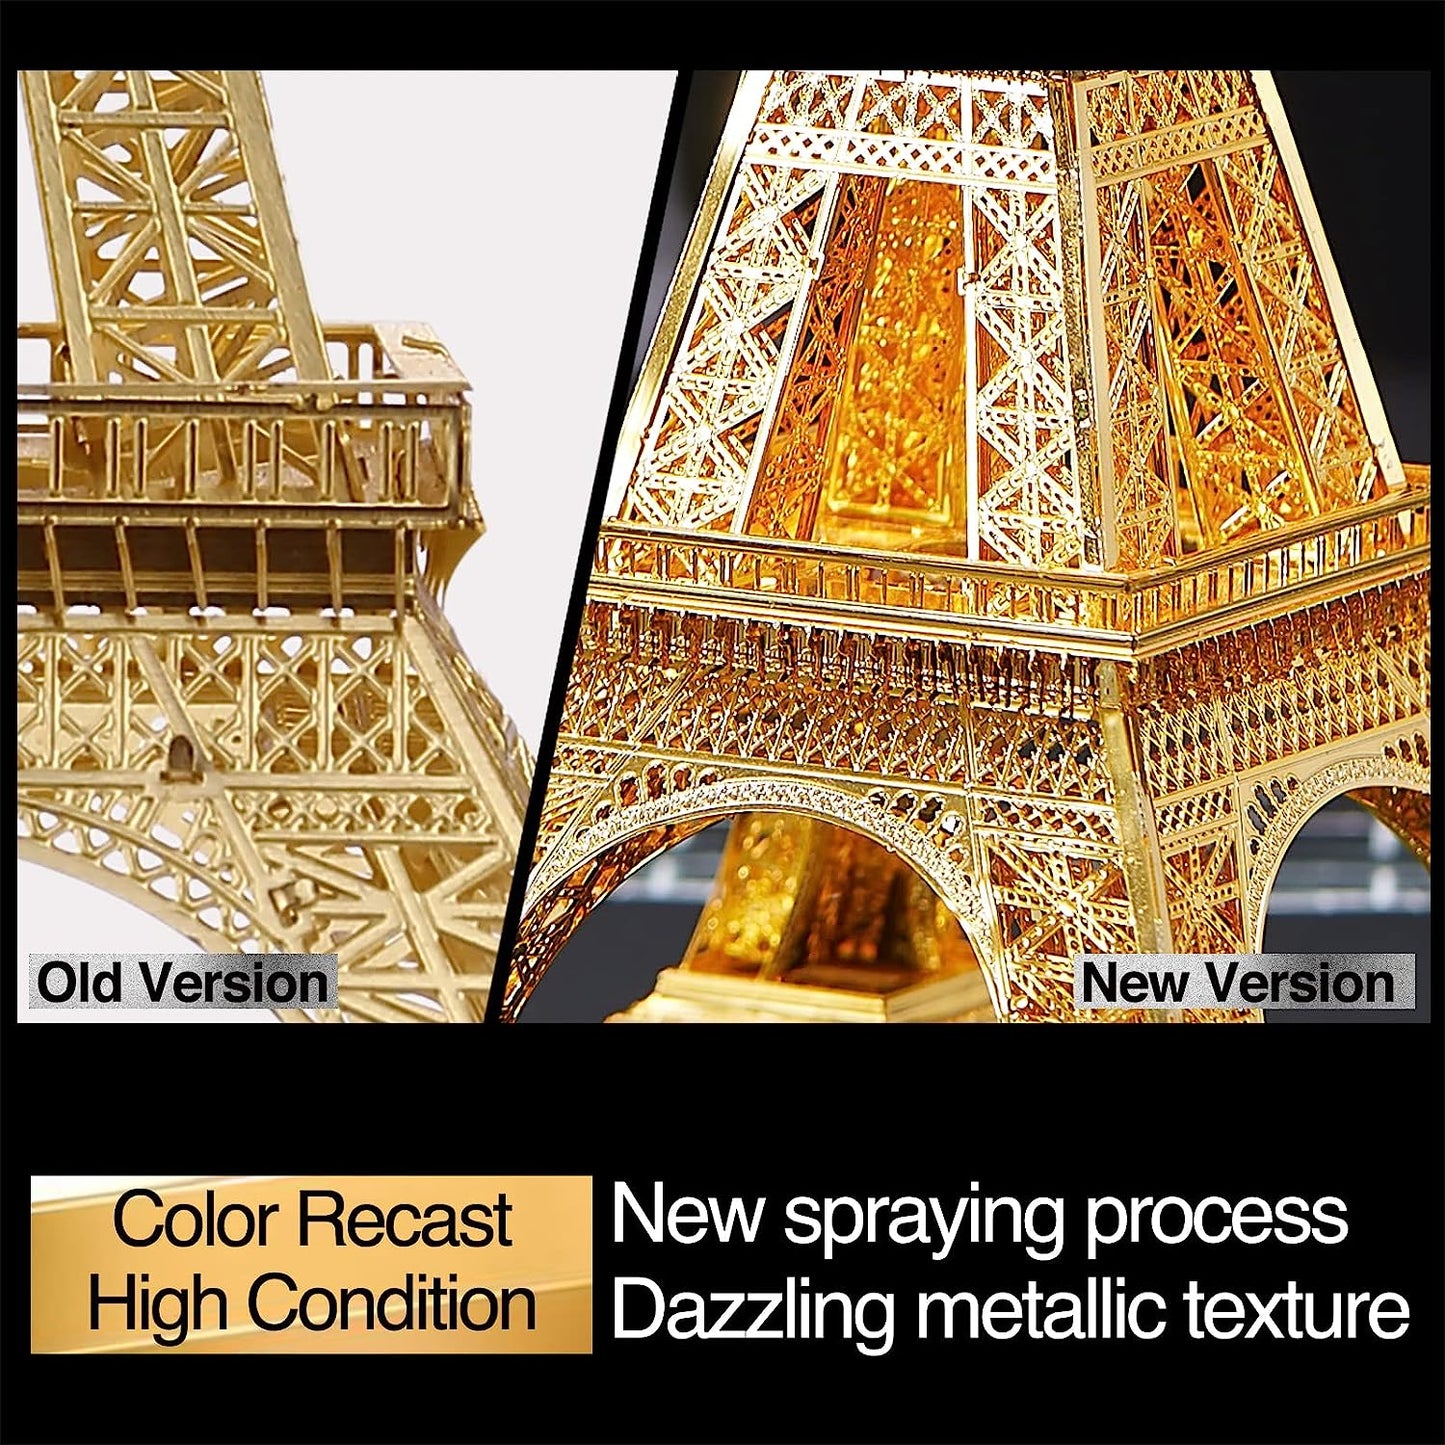 Piececool Upgraded Eiffel Tower Architecture Building Kits